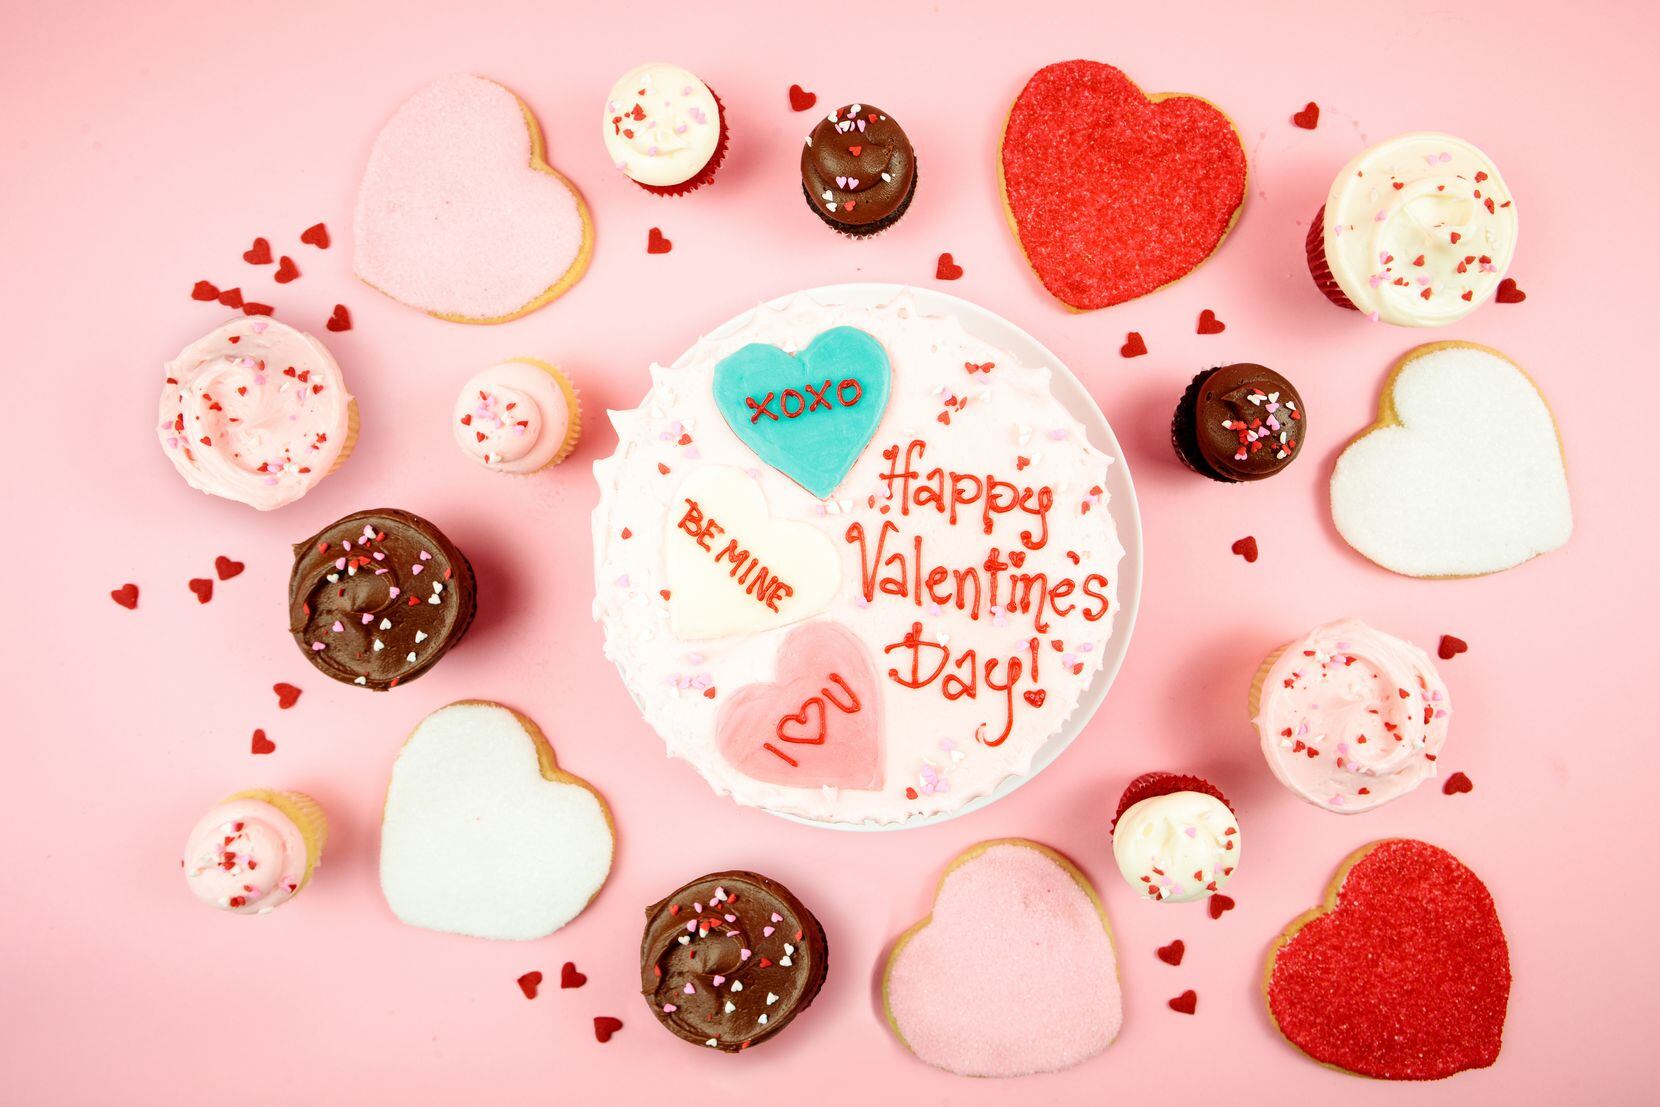 SusieCakes is making cupcakes, cakes, heart-shaped frosted sugar cookies and decorating kits...